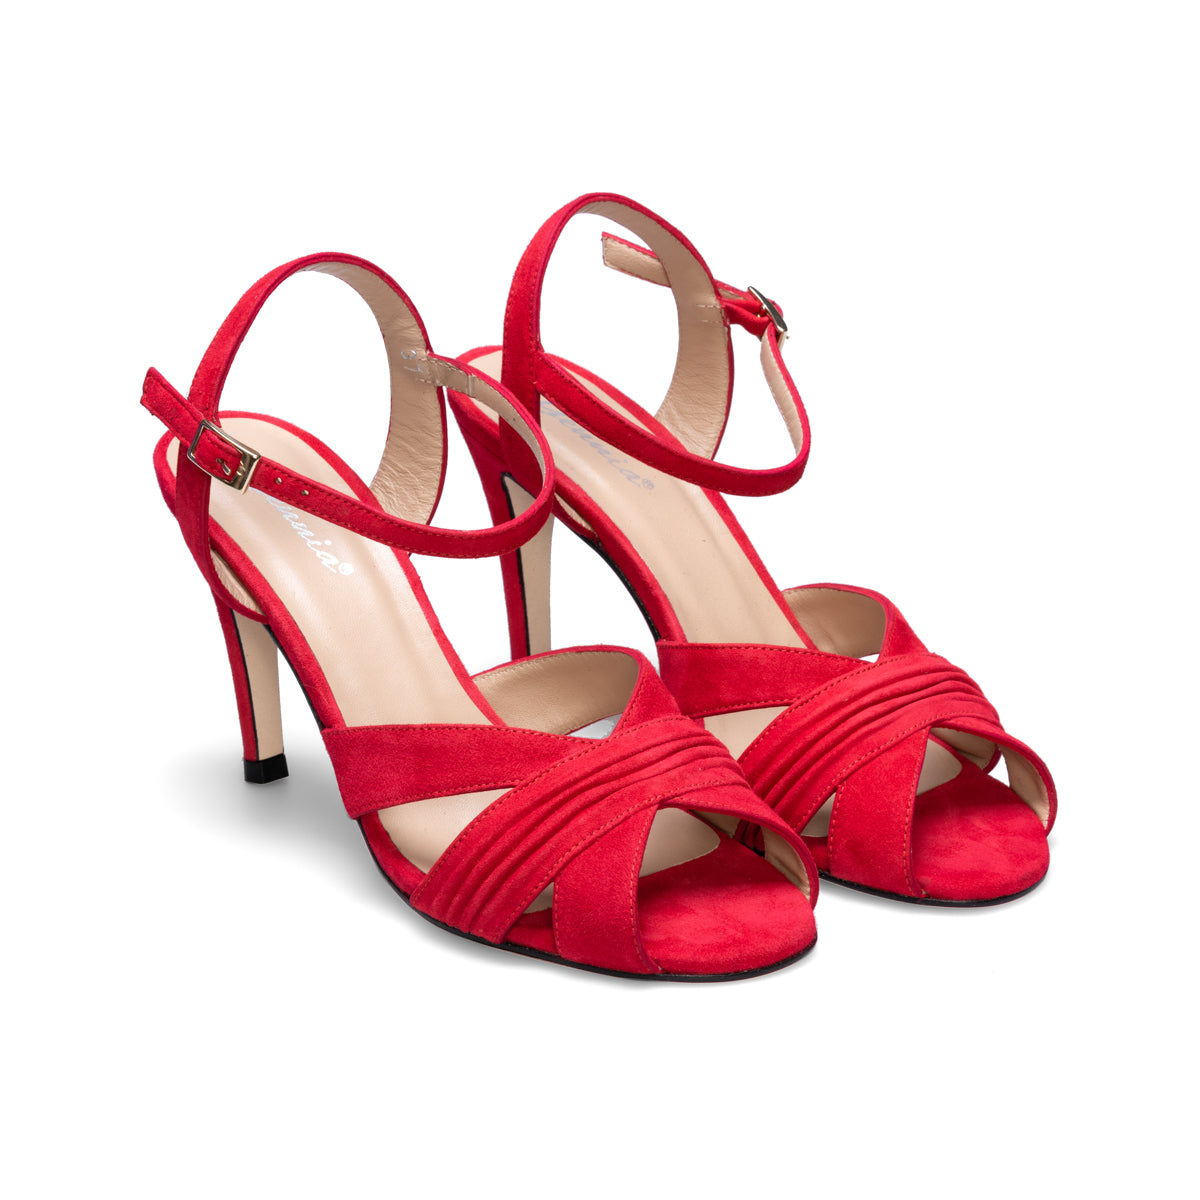 FERIDE Red Leather Suede